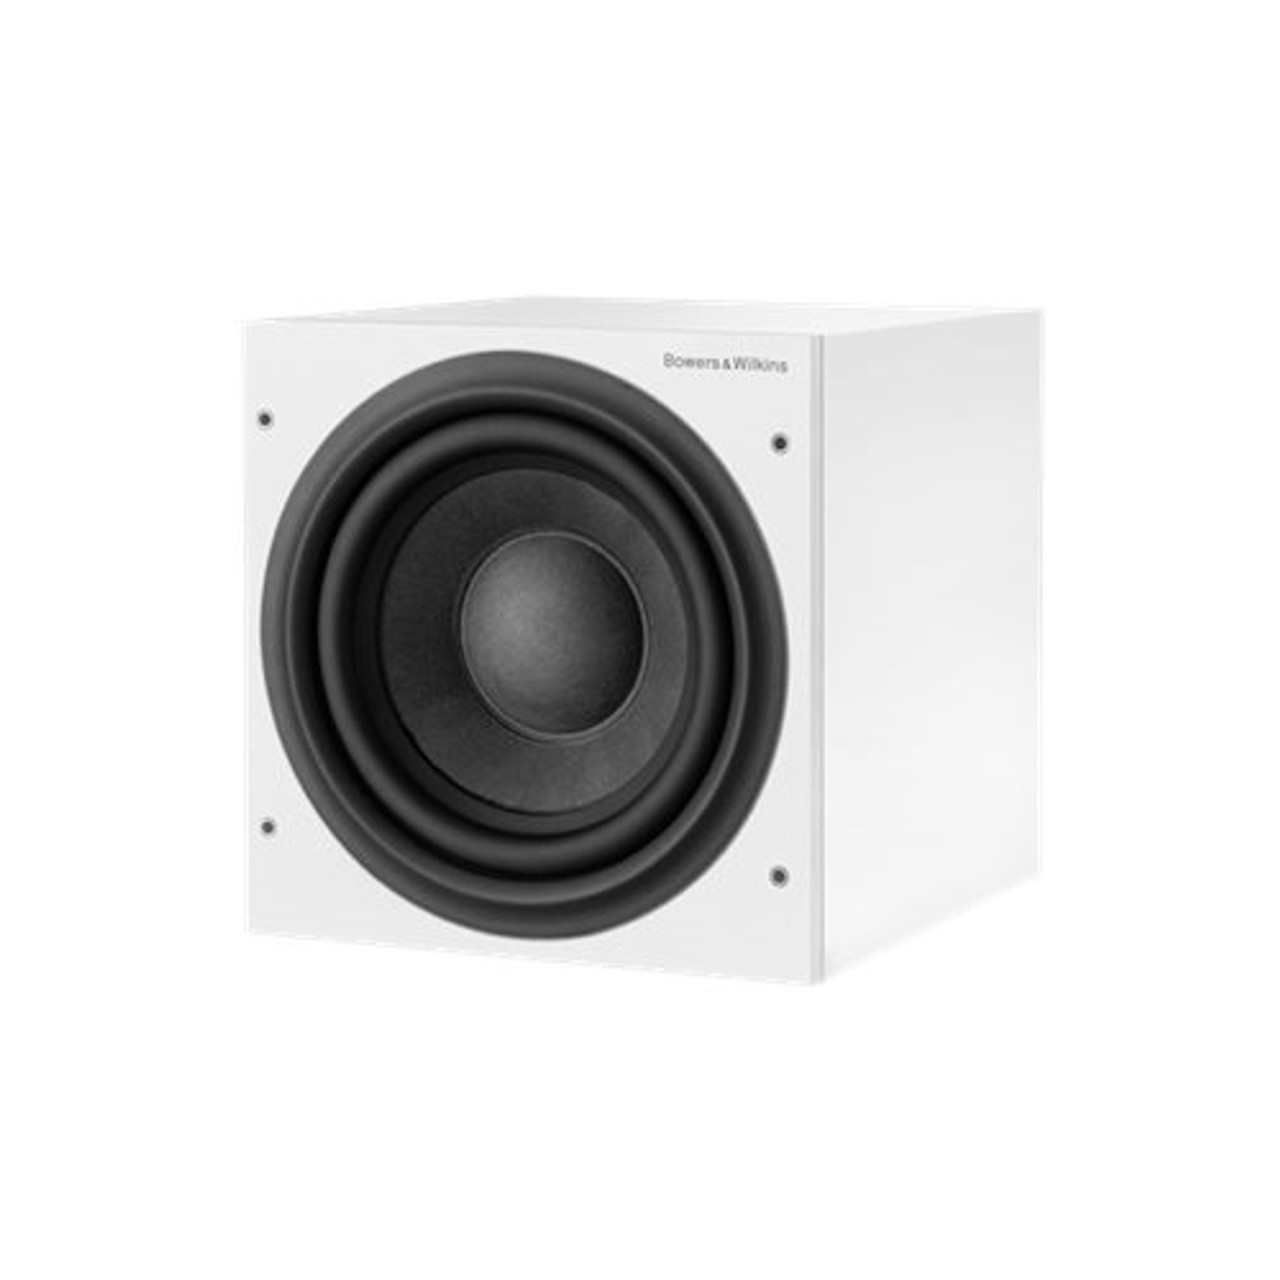 Bowers & Wilkins - 600 Series 10" 500W Powered Subwoofer - White